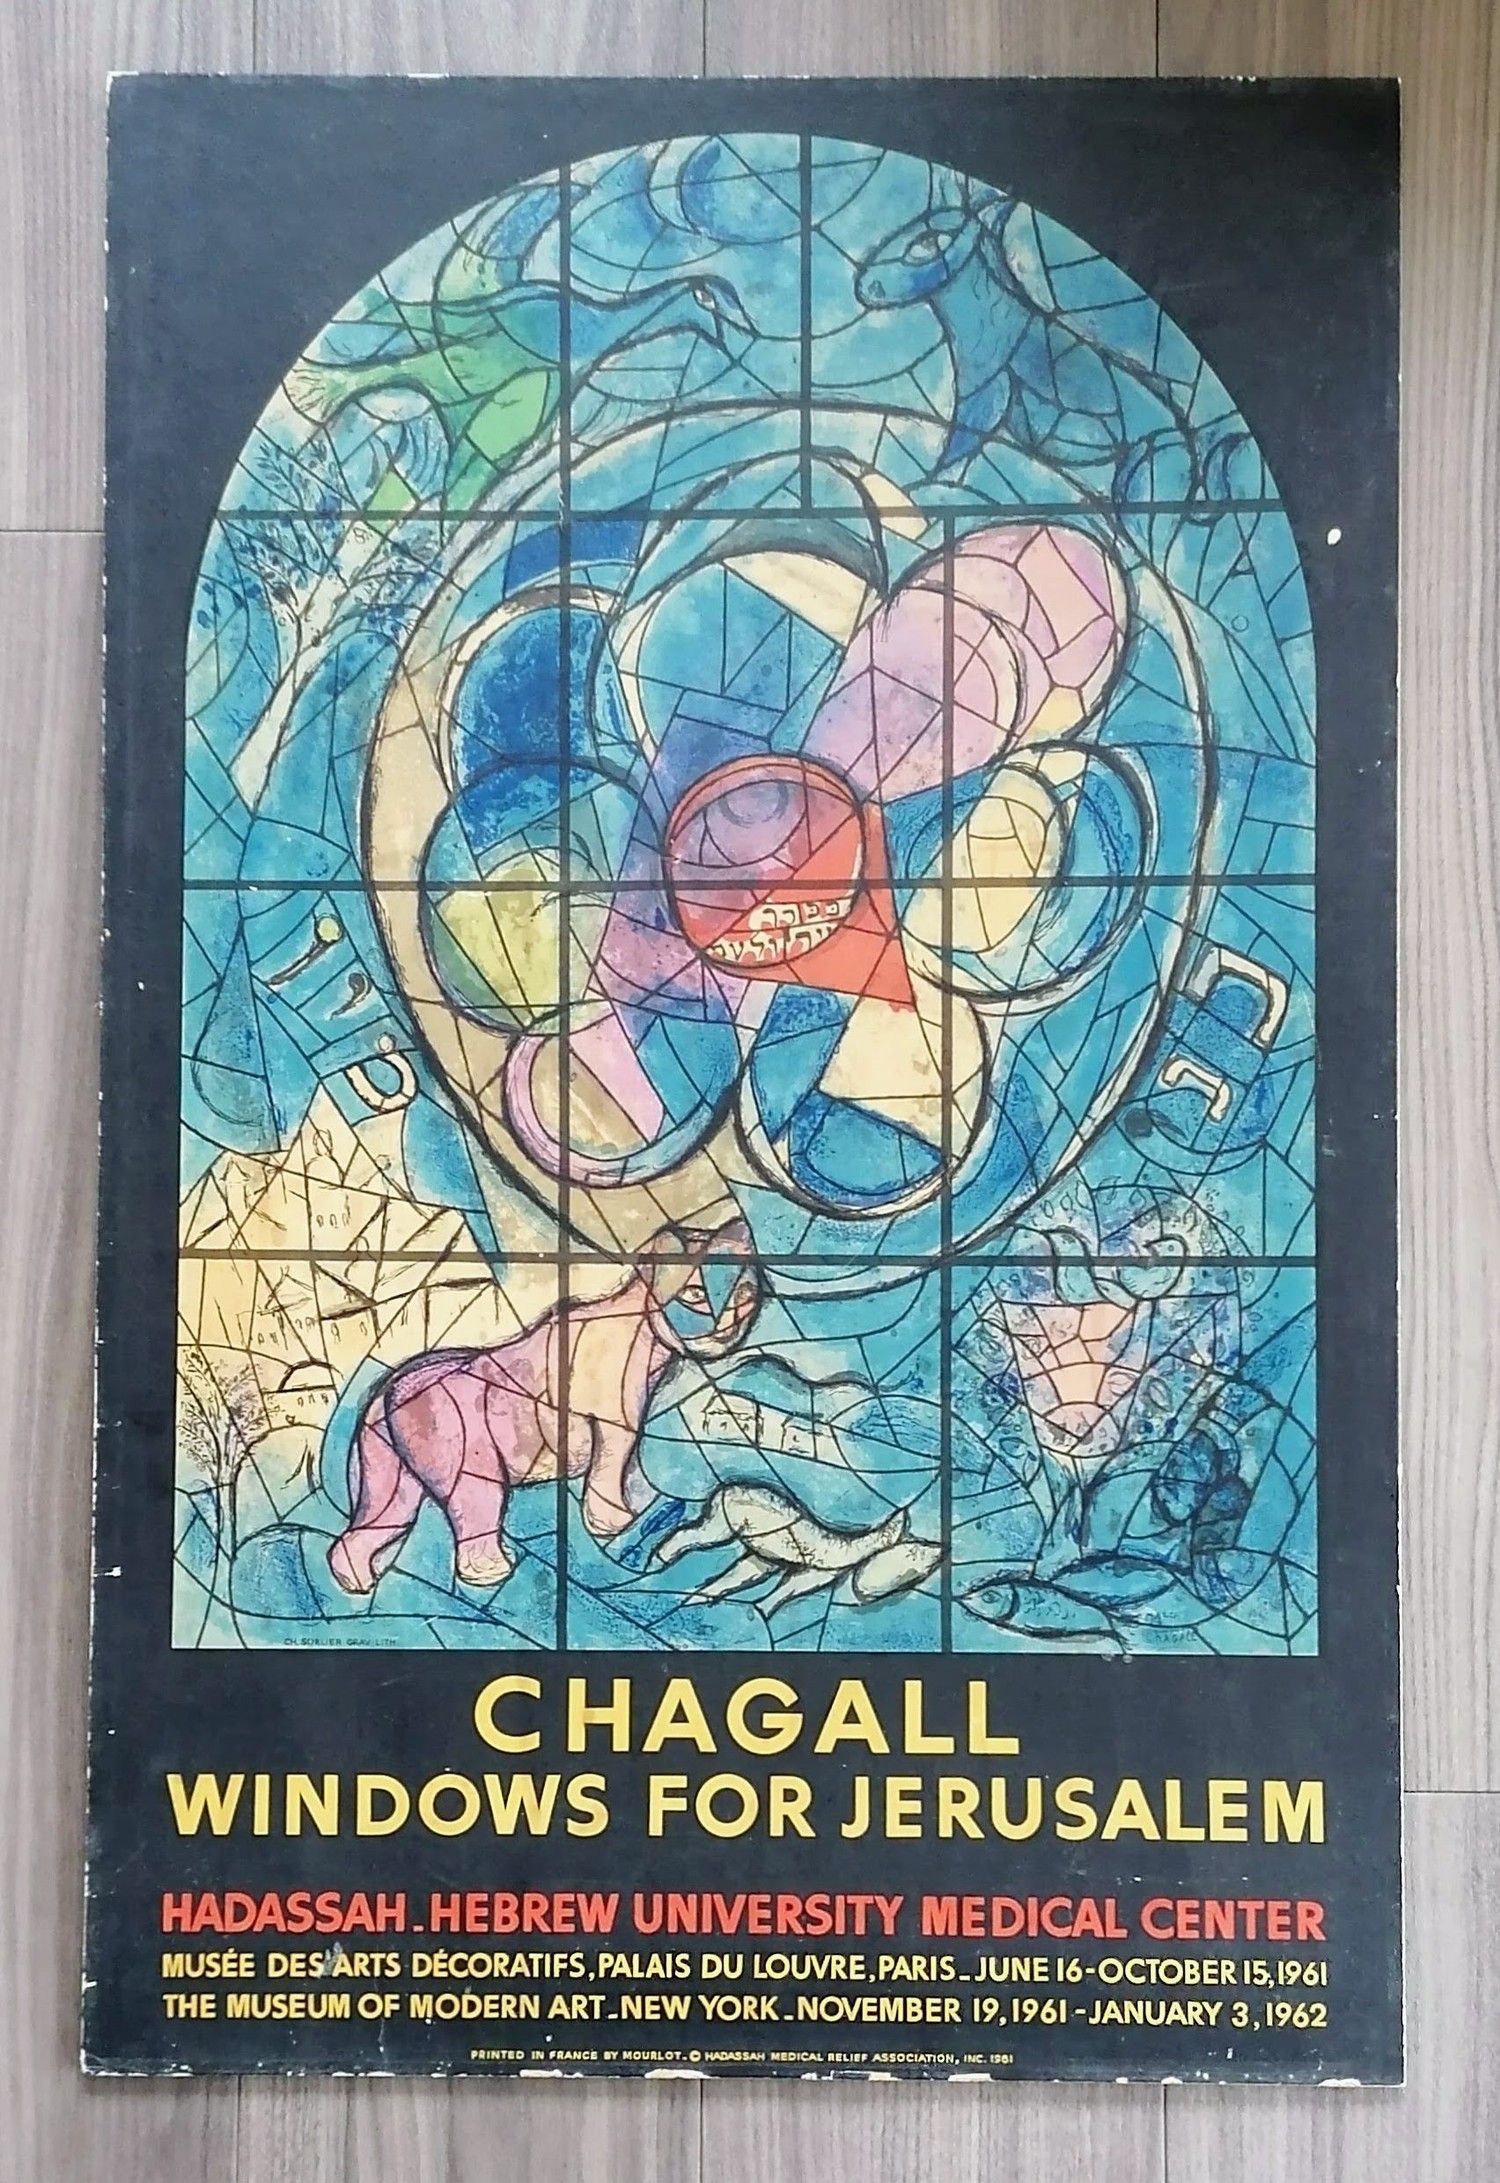 Marc Chagall poster printed by Mourlot for the Hadassa Medical Relief Association, 1961: WINDOWS FOR